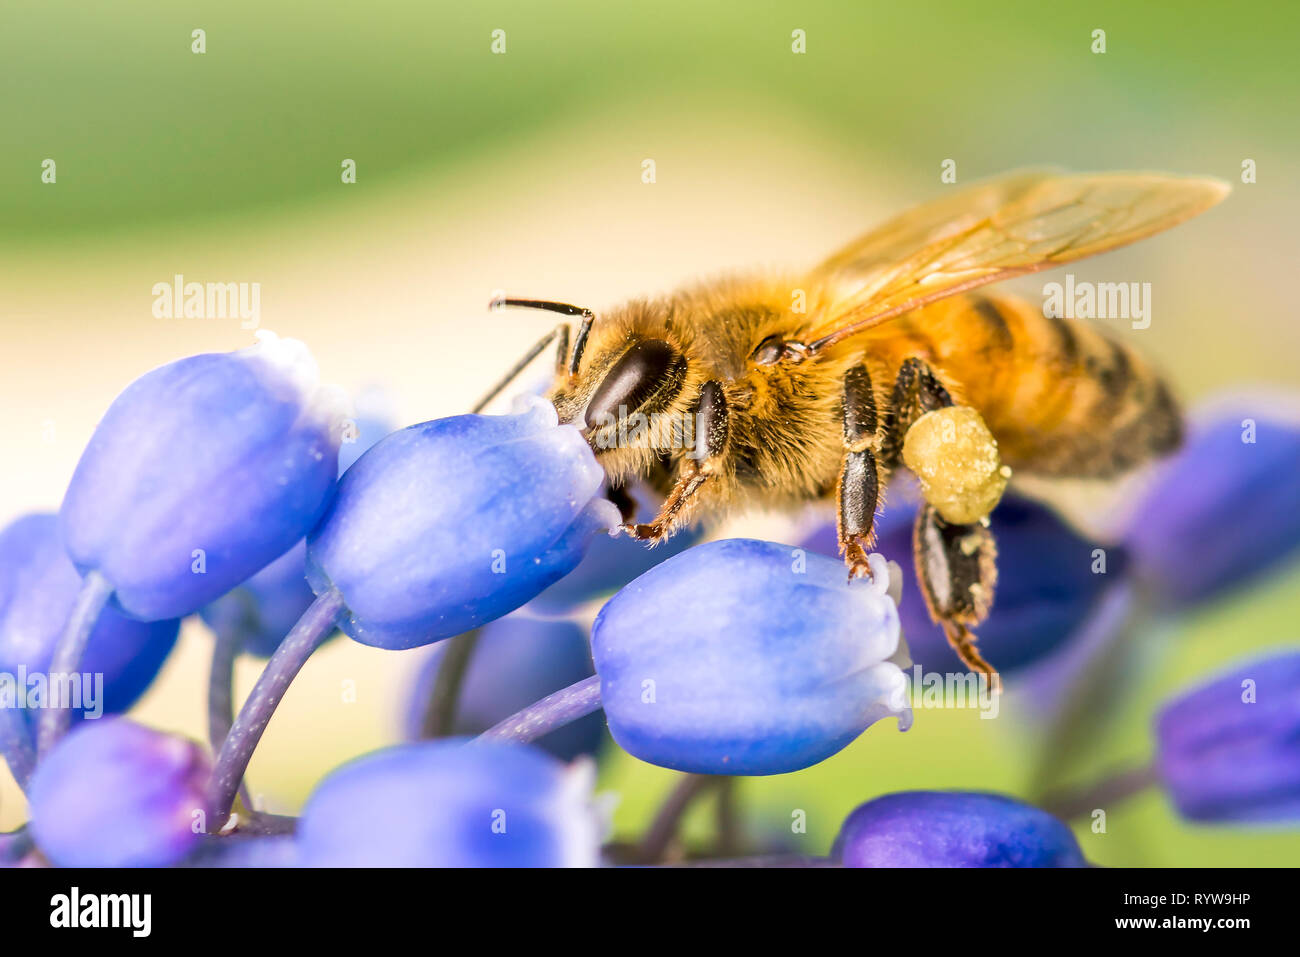 A single Bee on a purple flower collecting pollen Stock Photo